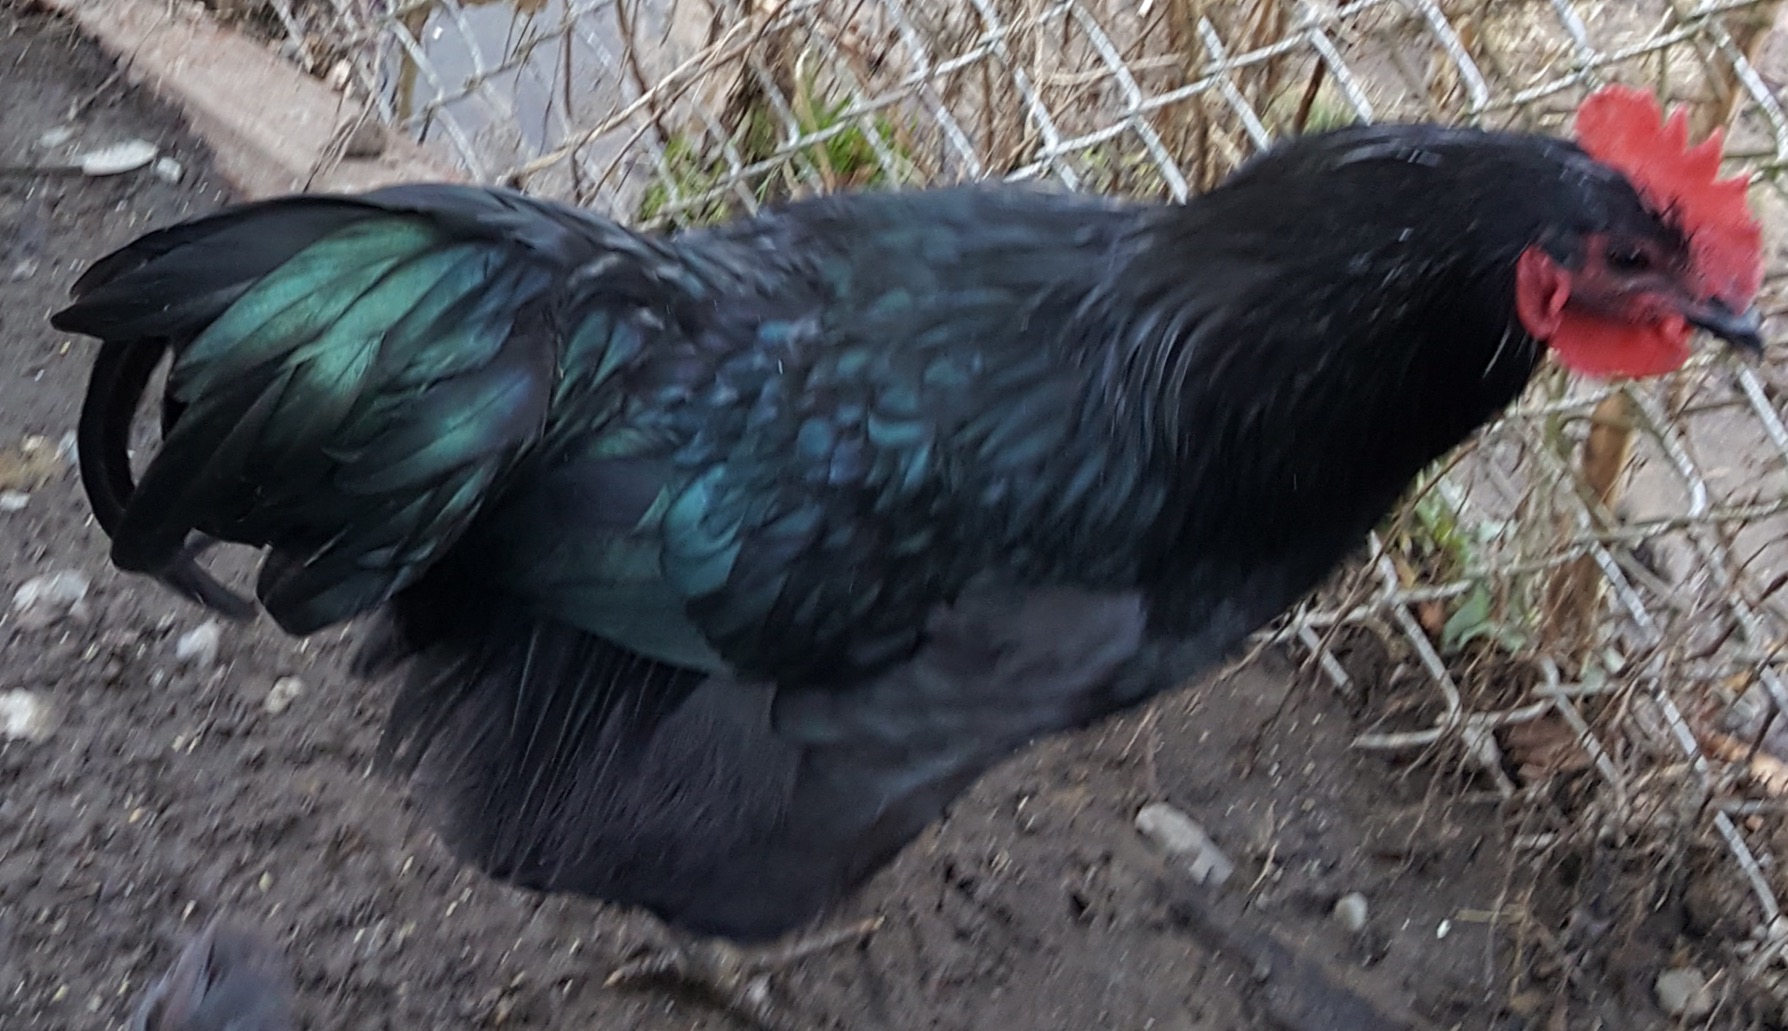 Lavender Orpington rooster mated with either a Black Jersey Giant hen or maybe an Australorp hen? This rooster's green plumage is more brilliant than any of my hens. He's already quite the cock-of-the-walk though at about six months of age.